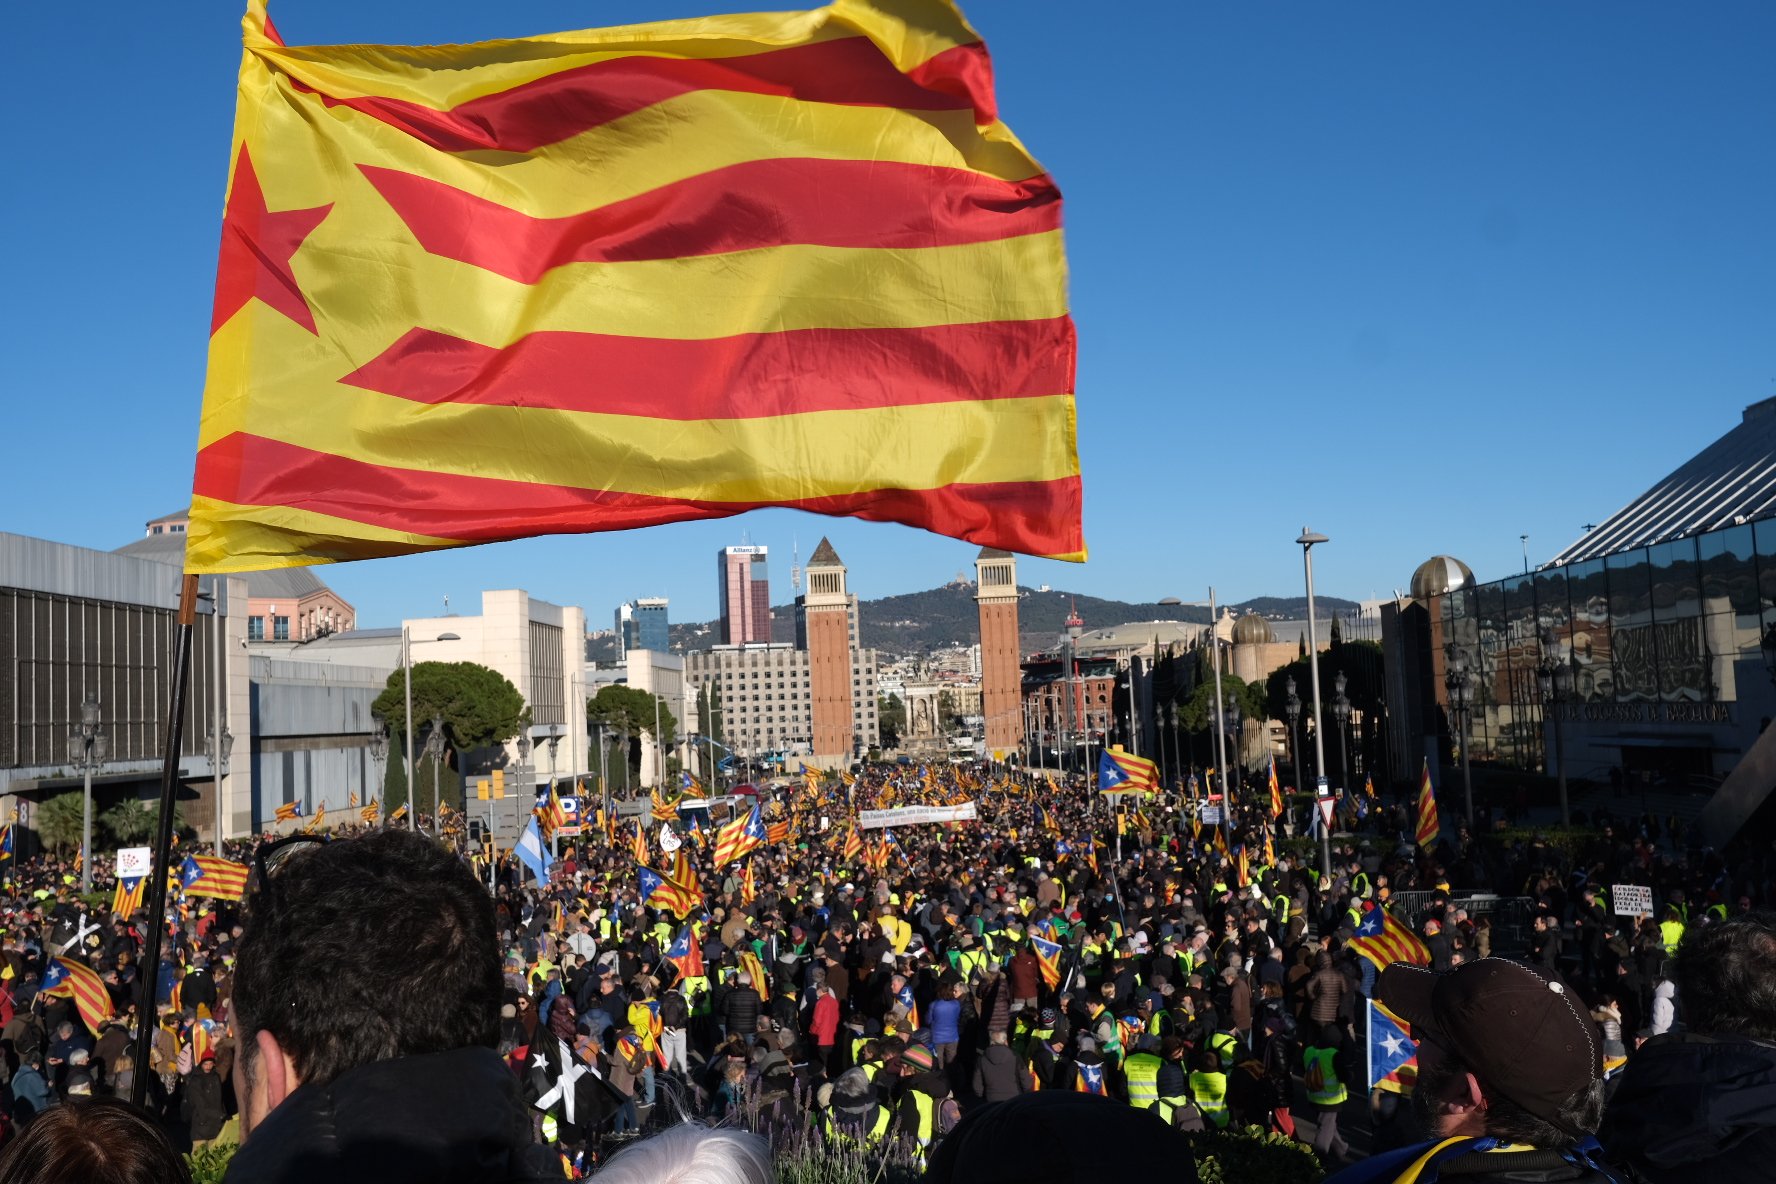 International media report Catalan pro-independence protests in Barcelona